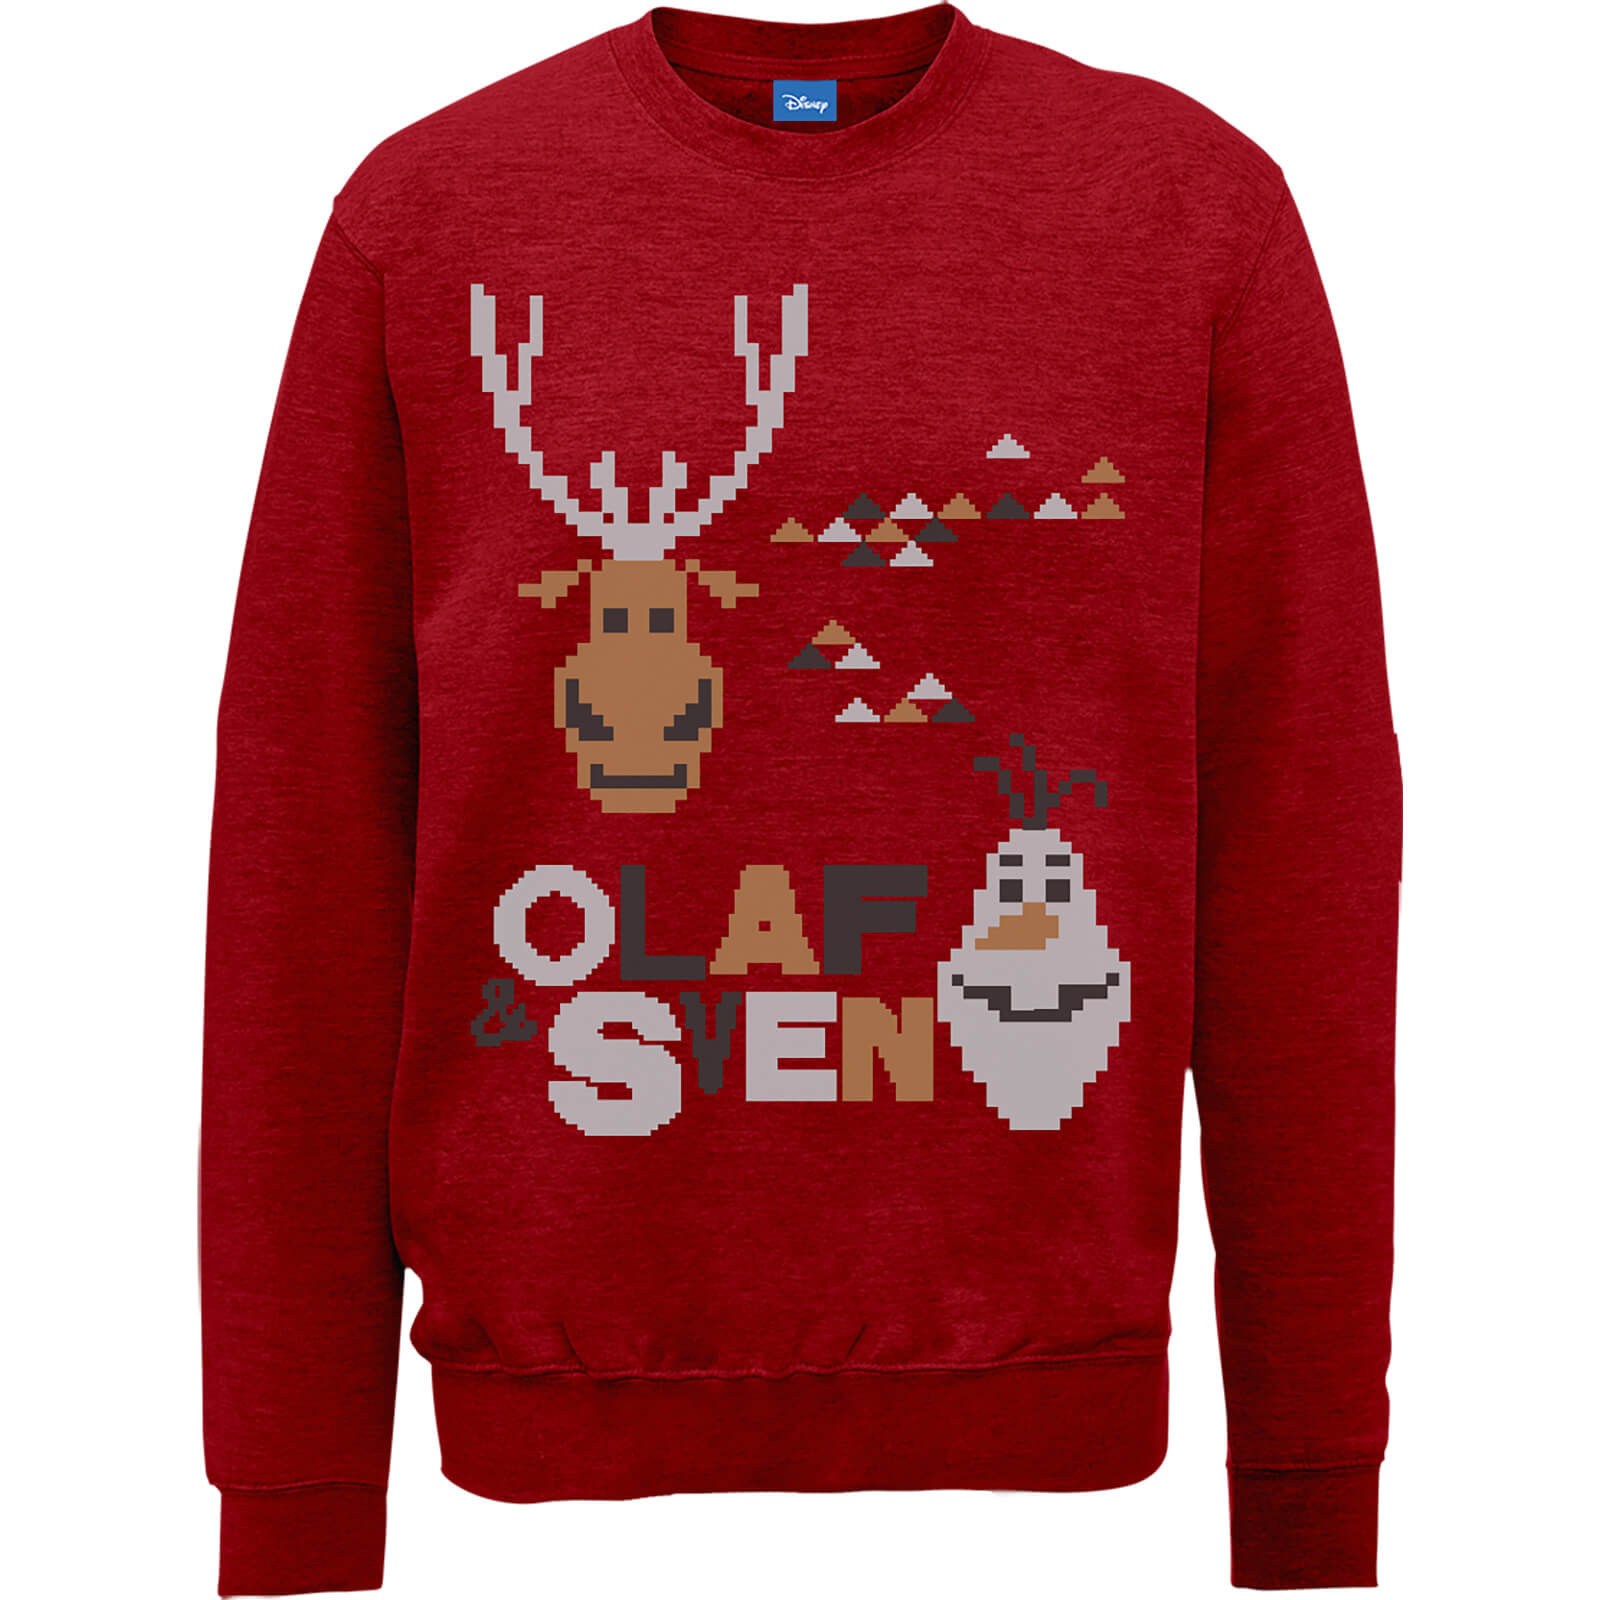 Disney Frozen Christmas Olaf And Sven Red Christmas Jumper - S